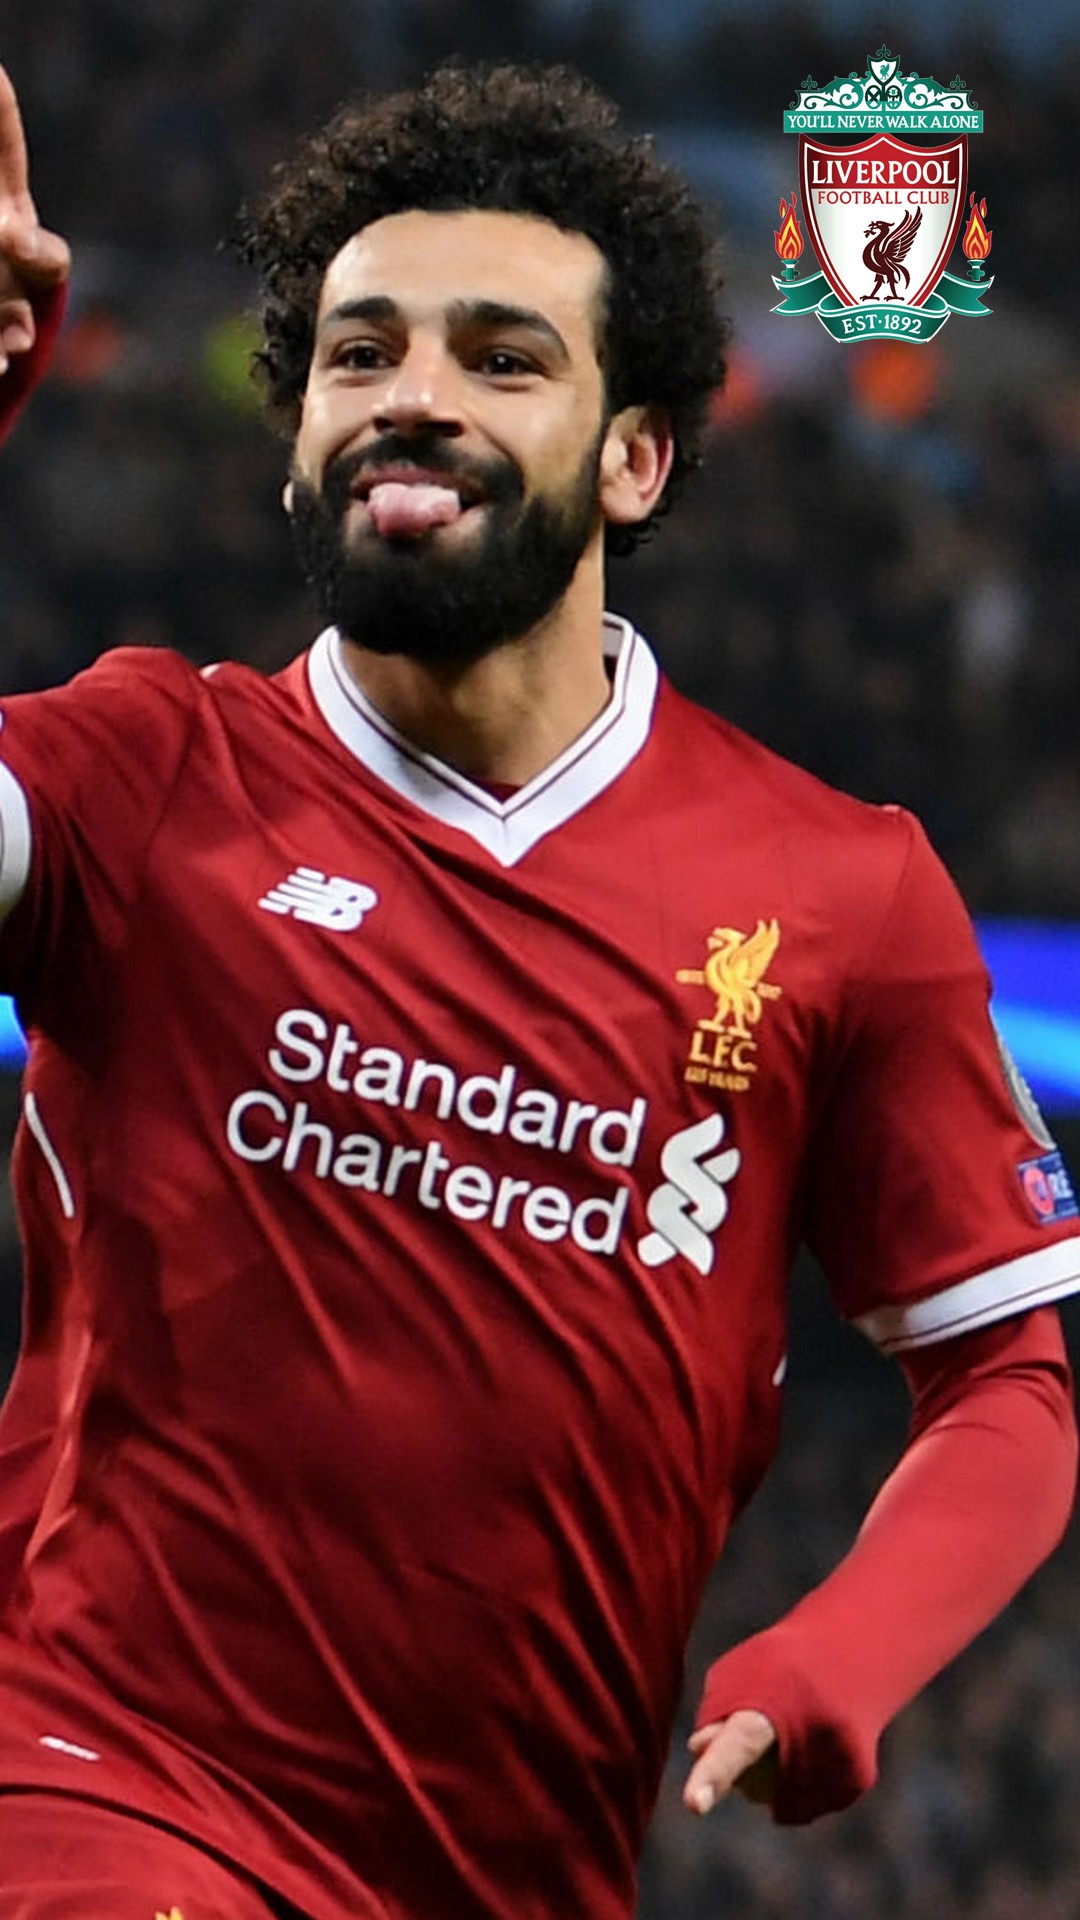 Mohamed Salah Wallpaper For Android with image resolution 1080x1920 pixel. You can make this wallpaper for your Android backgrounds, Tablet, Smartphones Screensavers and Mobile Phone Lock Screen